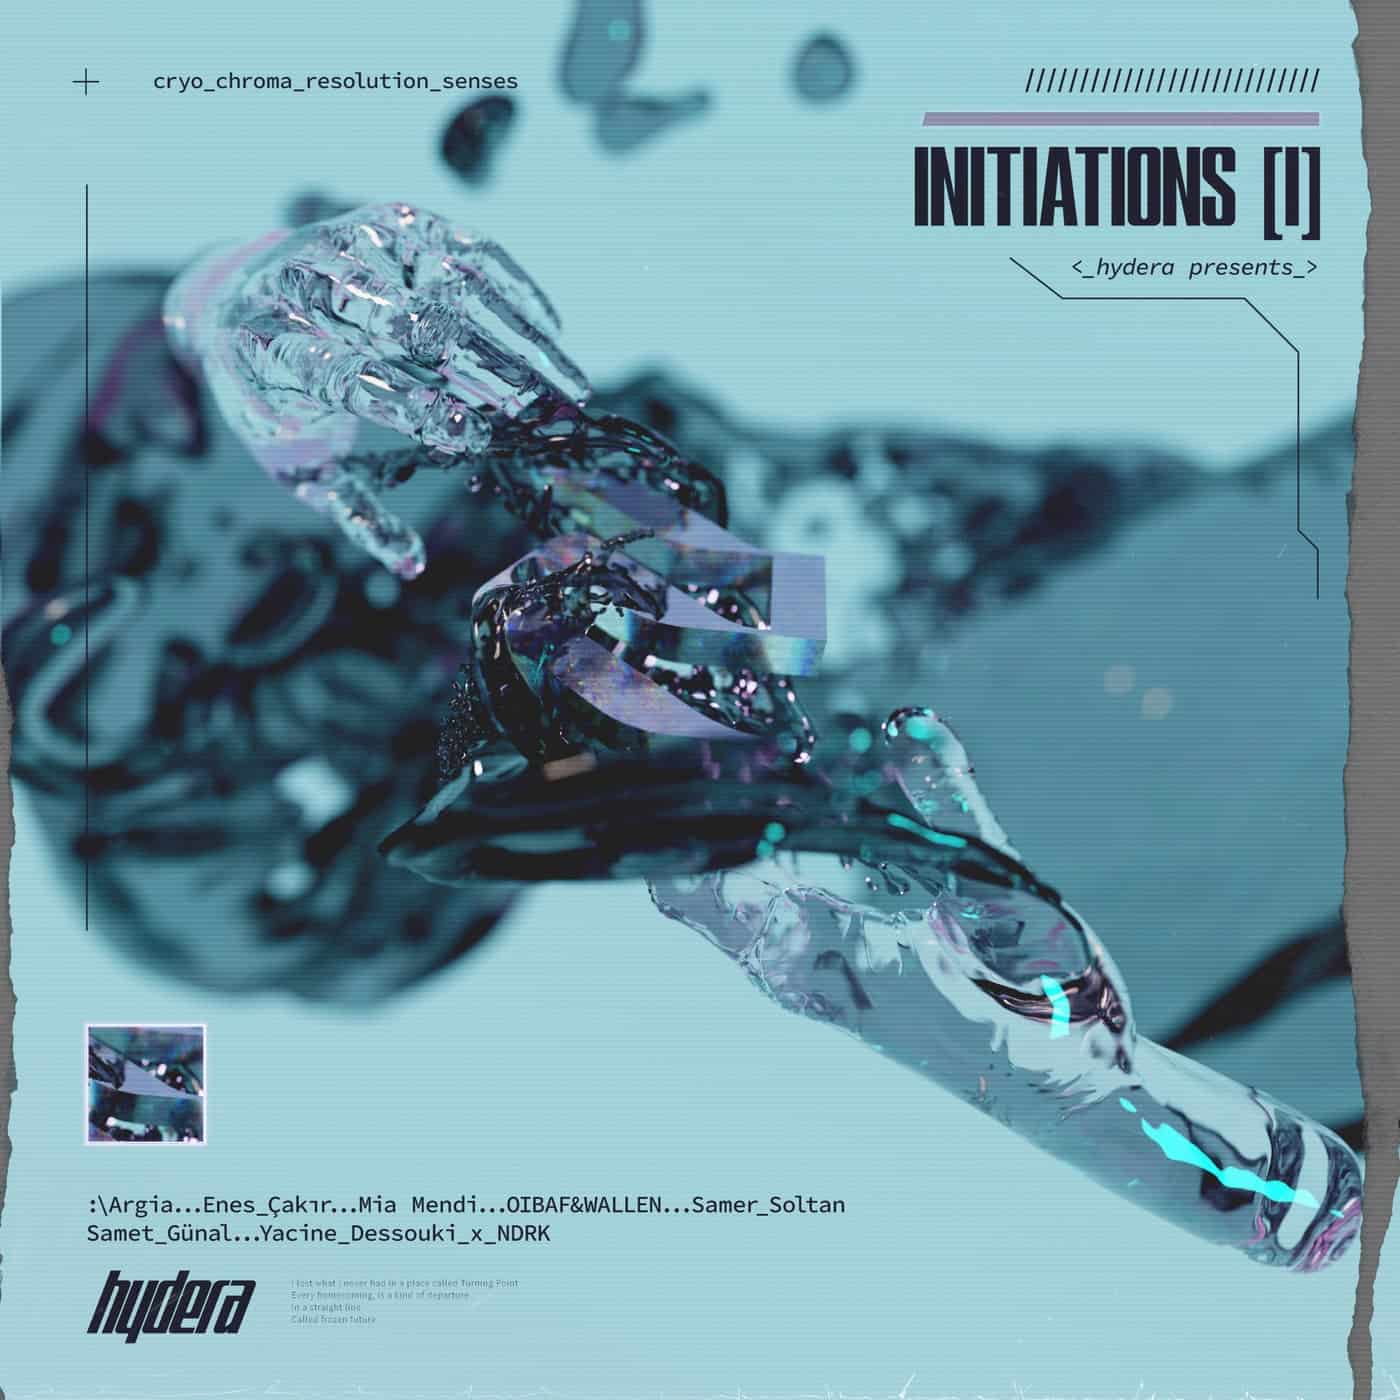 image cover: OIBAF&WALLEN - Initiations, Pt. 1 on hydera